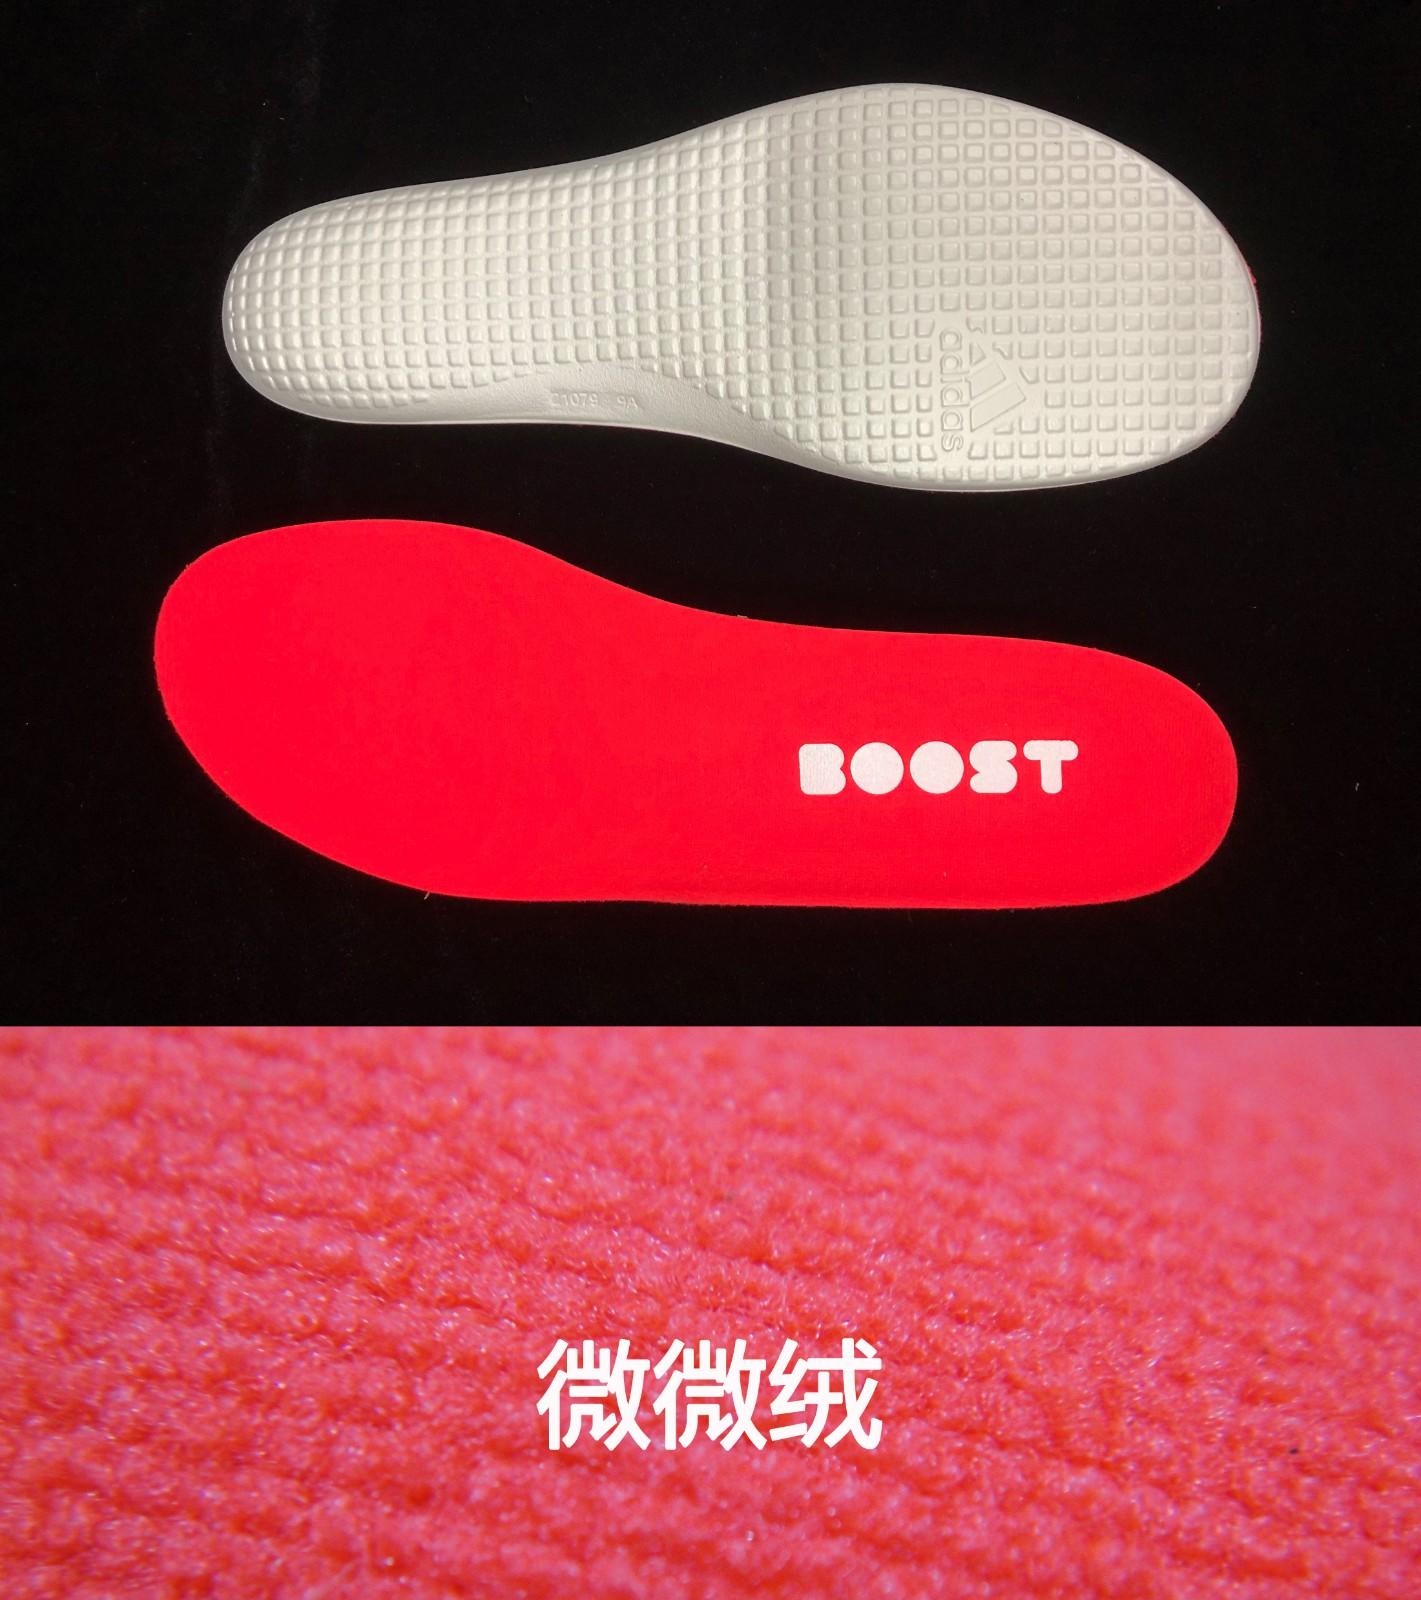 ultra boost insole slipping